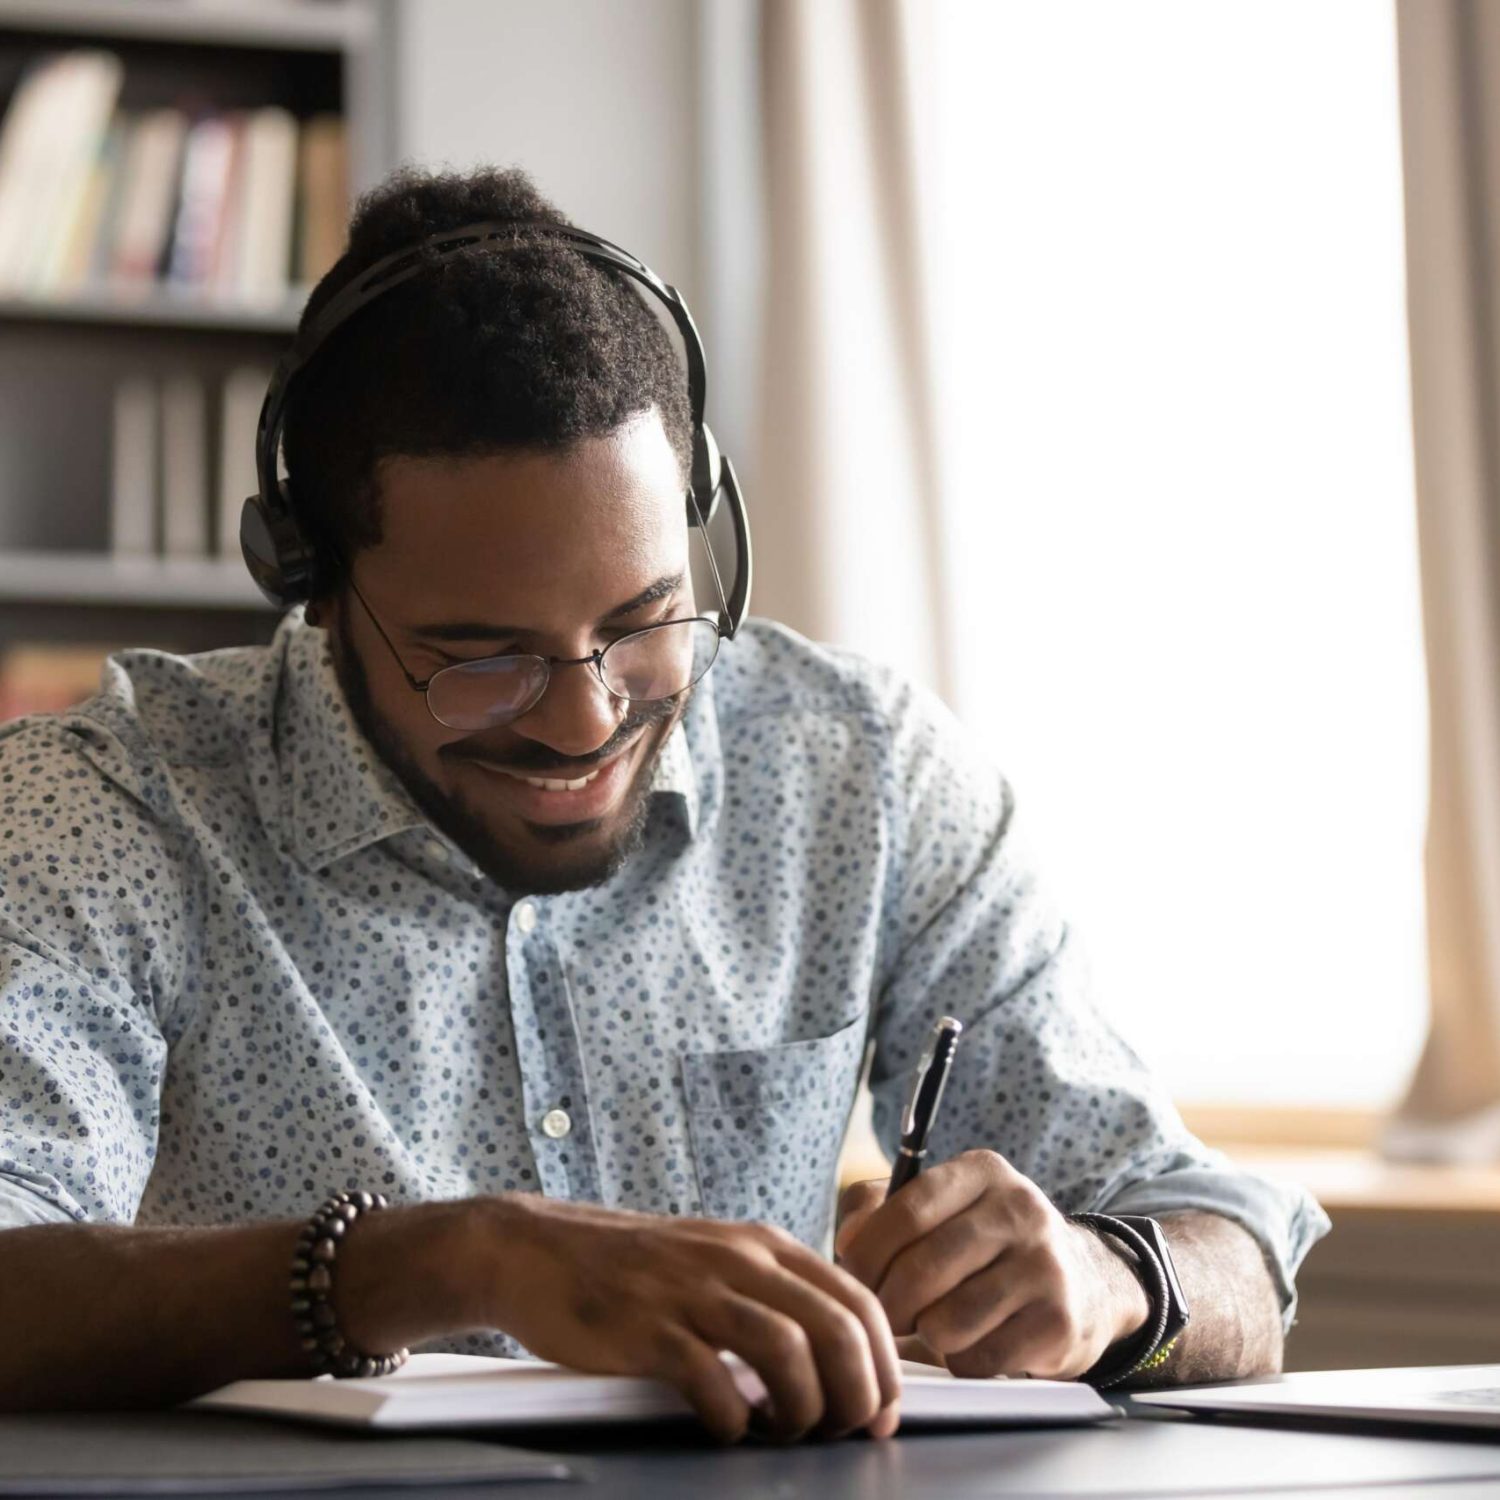 smiling-motivated-african-american-student-wearing-headphones-listening-lecture-writing-notes-notebook-sitting-work-desk-learning-language-online-watching-webinar-elearning-concept-min